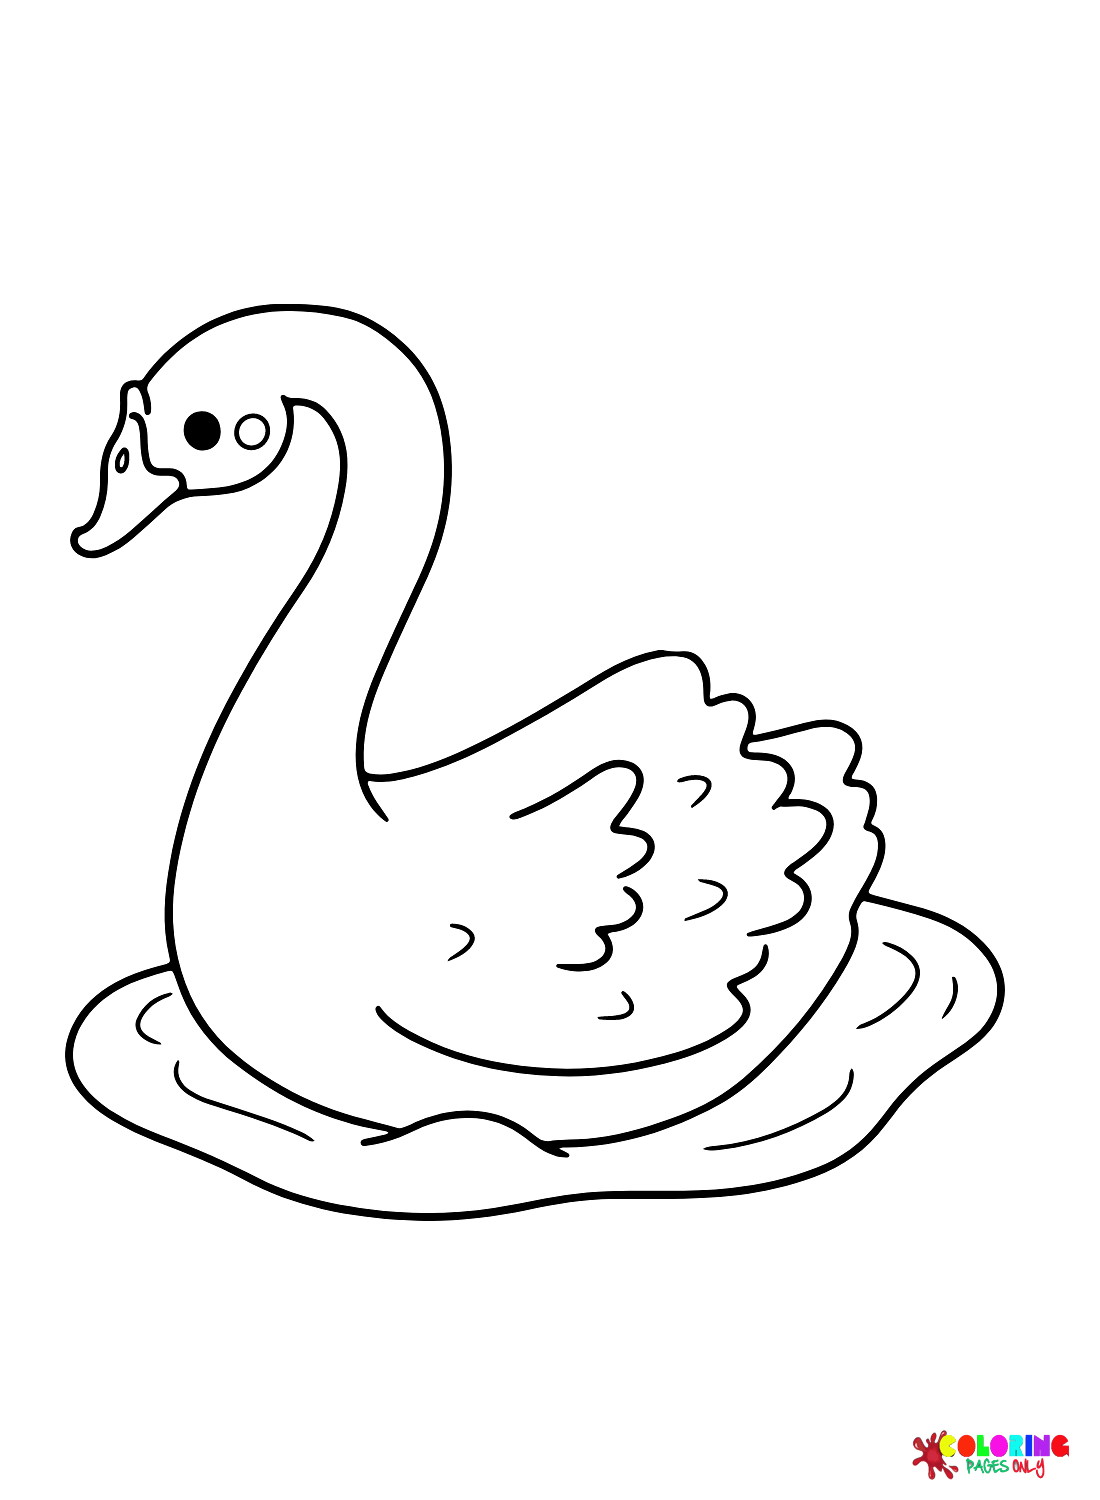 Swan coloring pages printable for free download